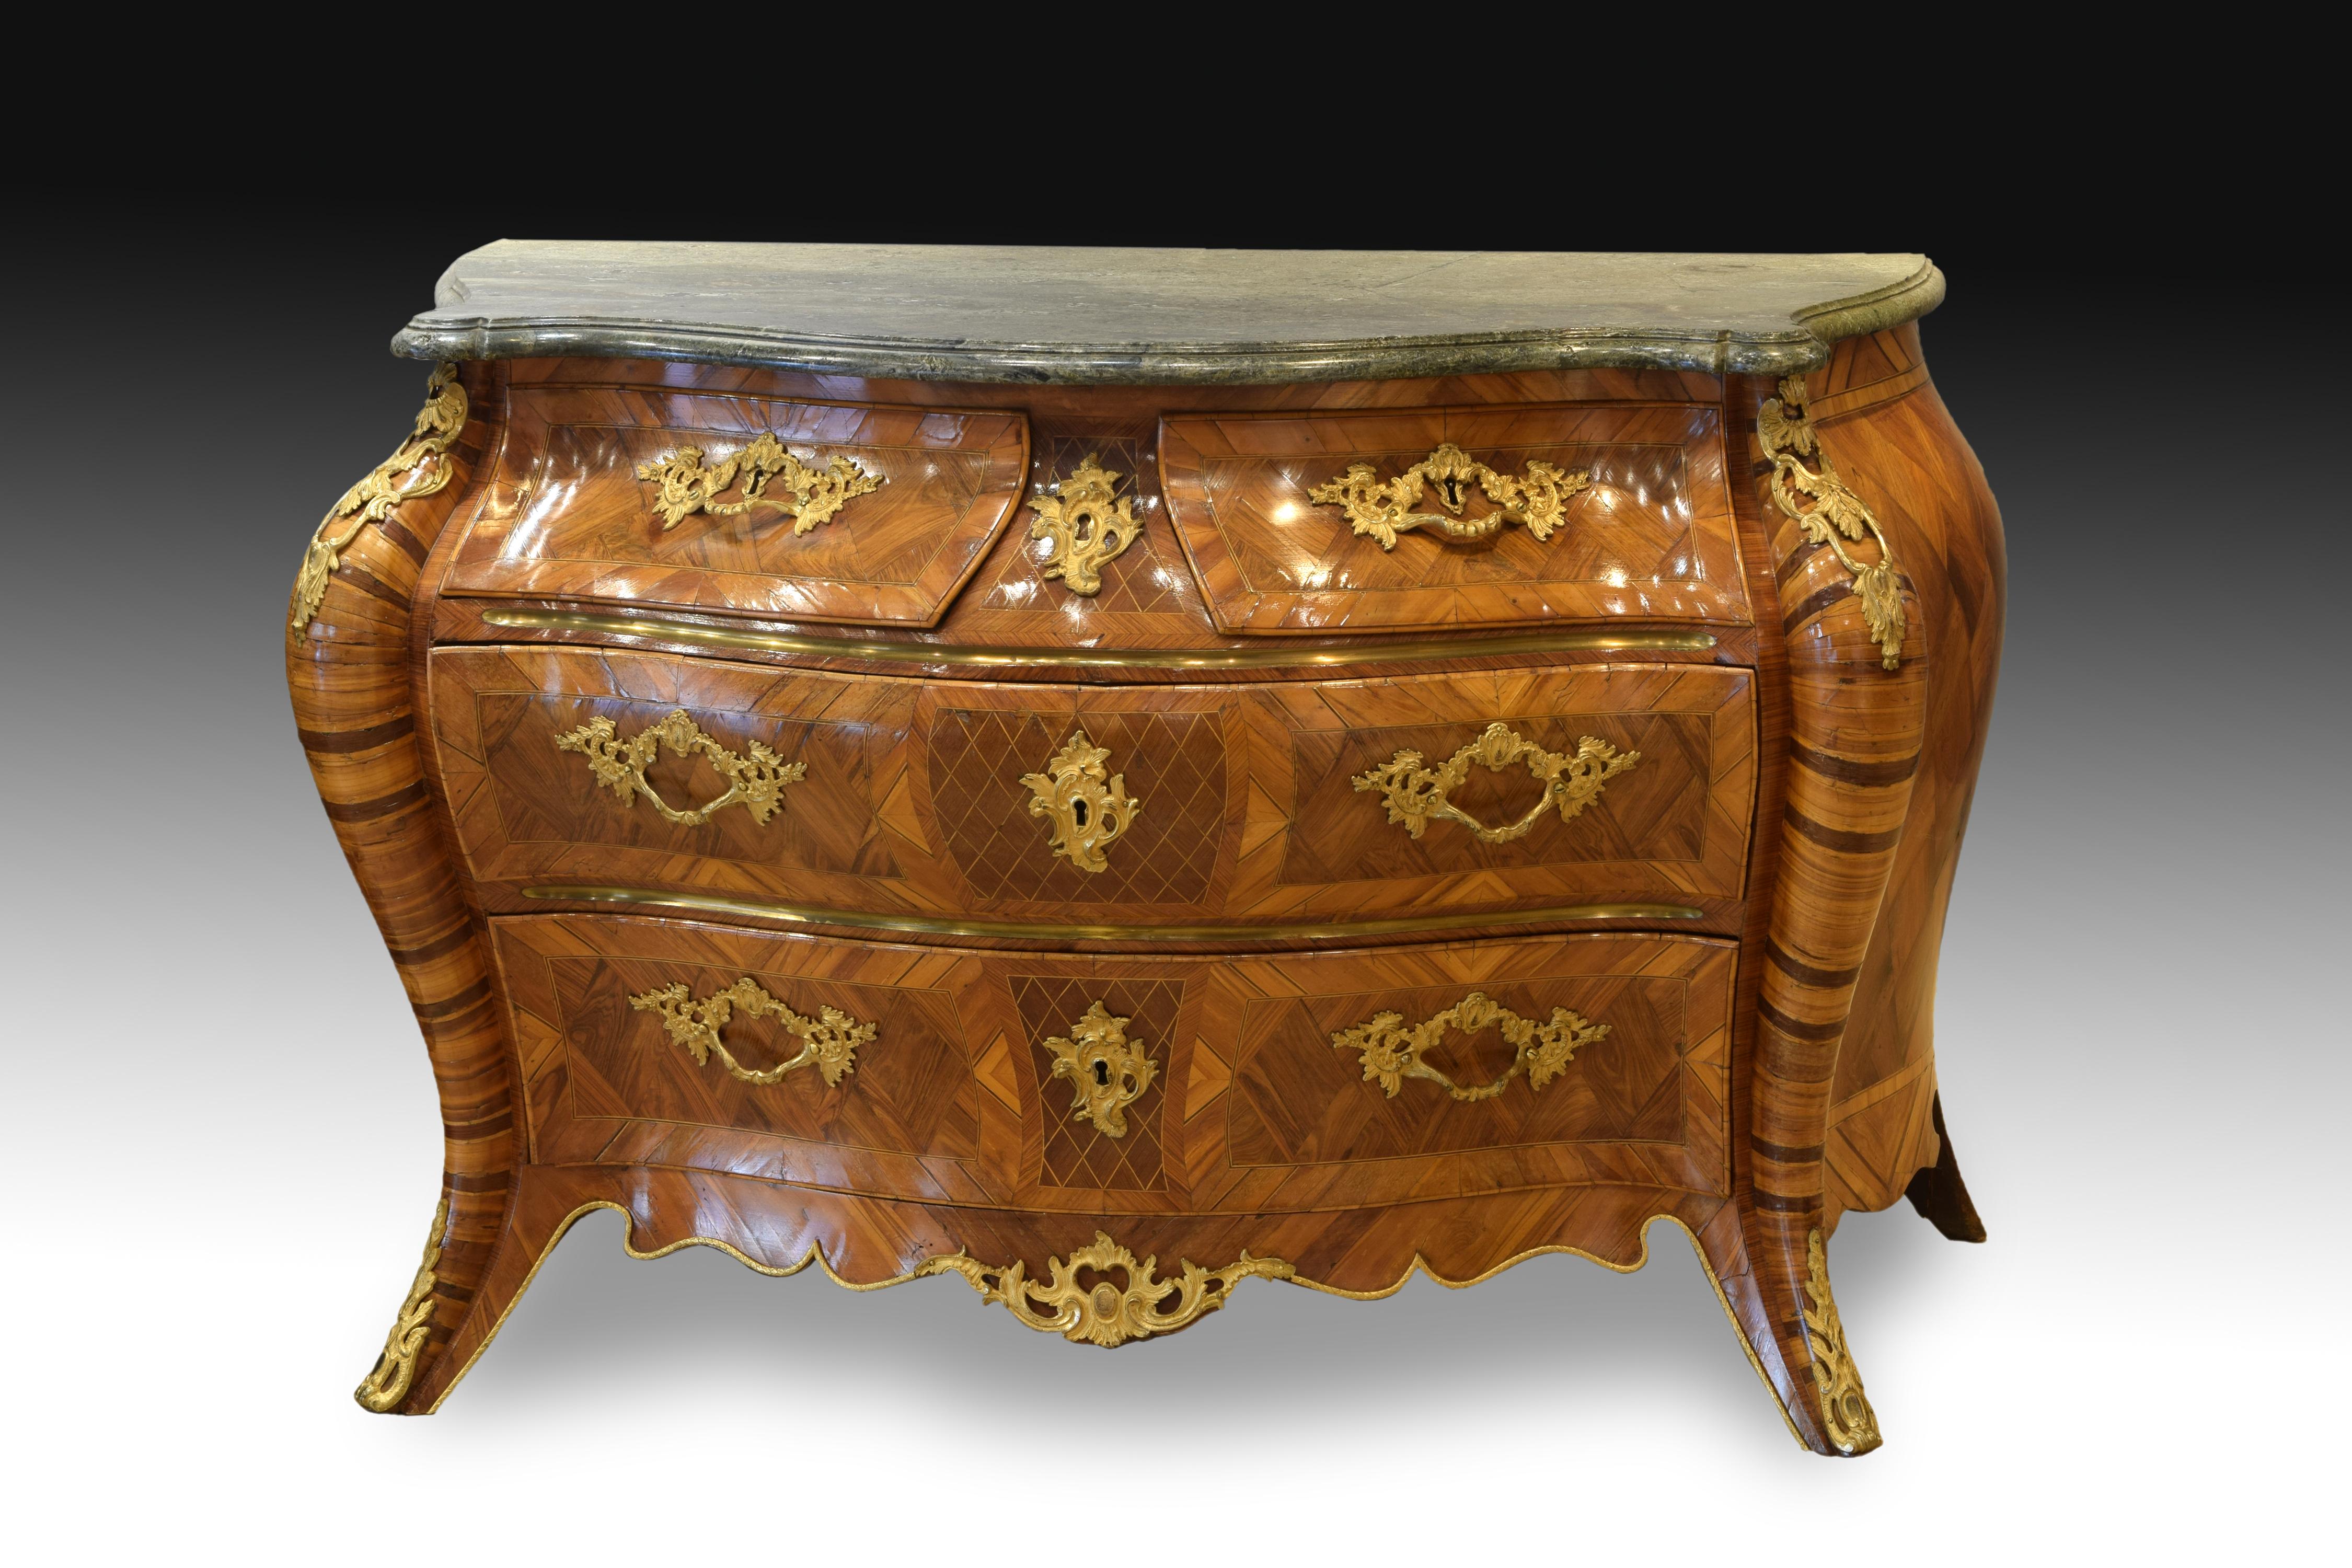 Rococo Pair of Bombe Commodes, Wood, Marble, Bronze, Sweden, 18th Century